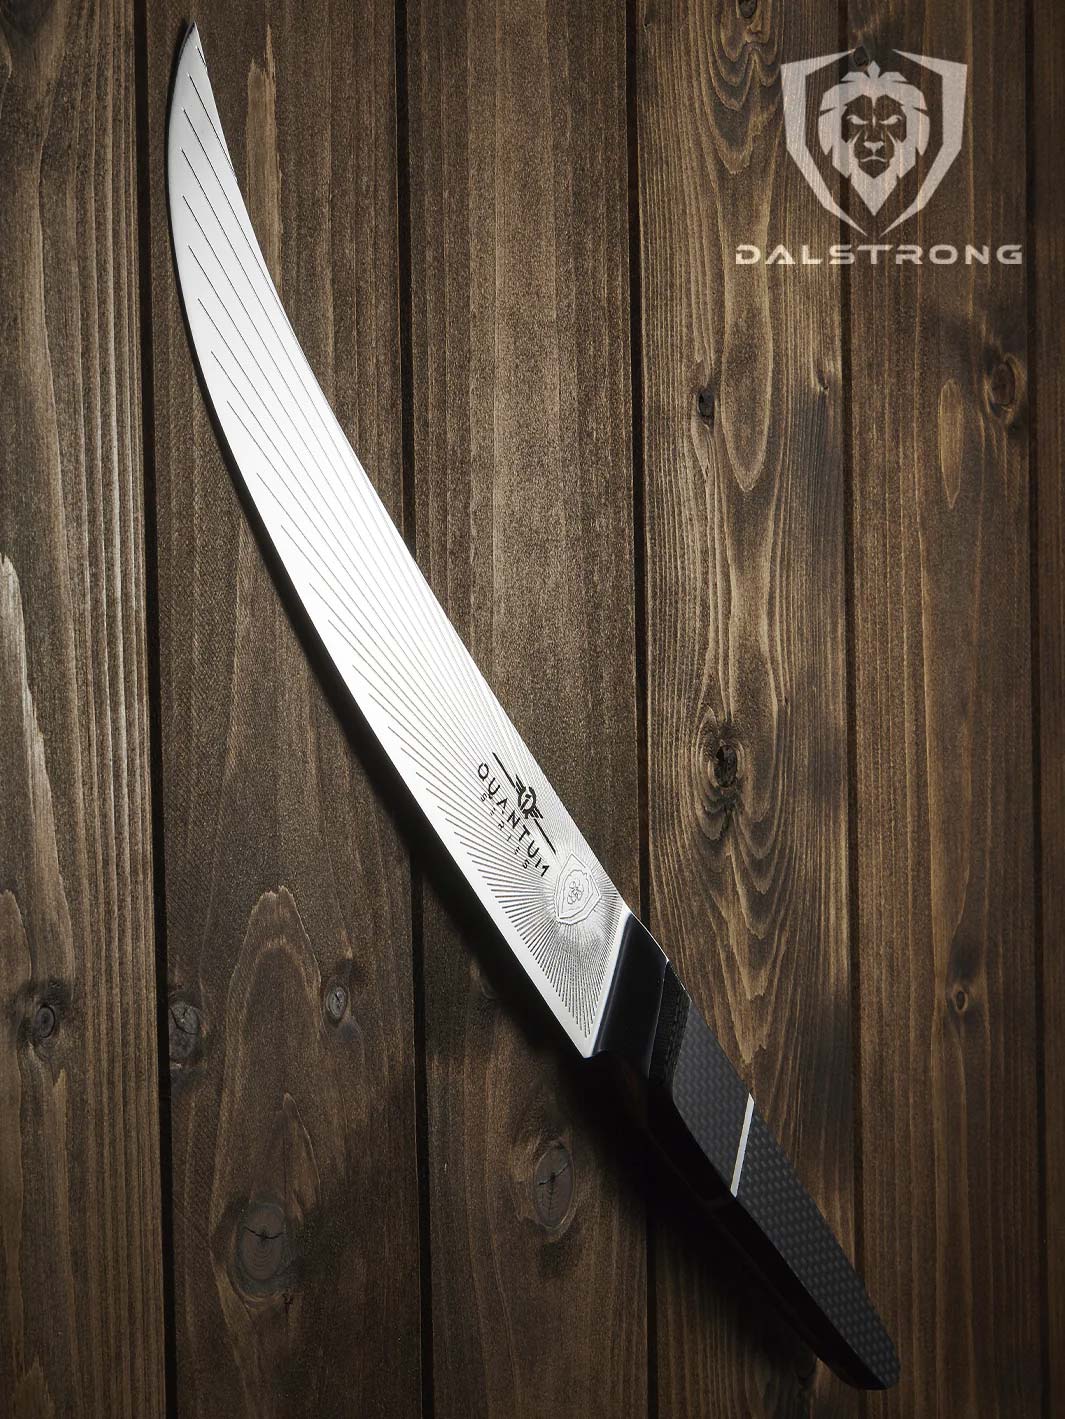 Dalstrong quantum 1 series 10 inch butcher knife with dragon skin handle on top of a wooden table.